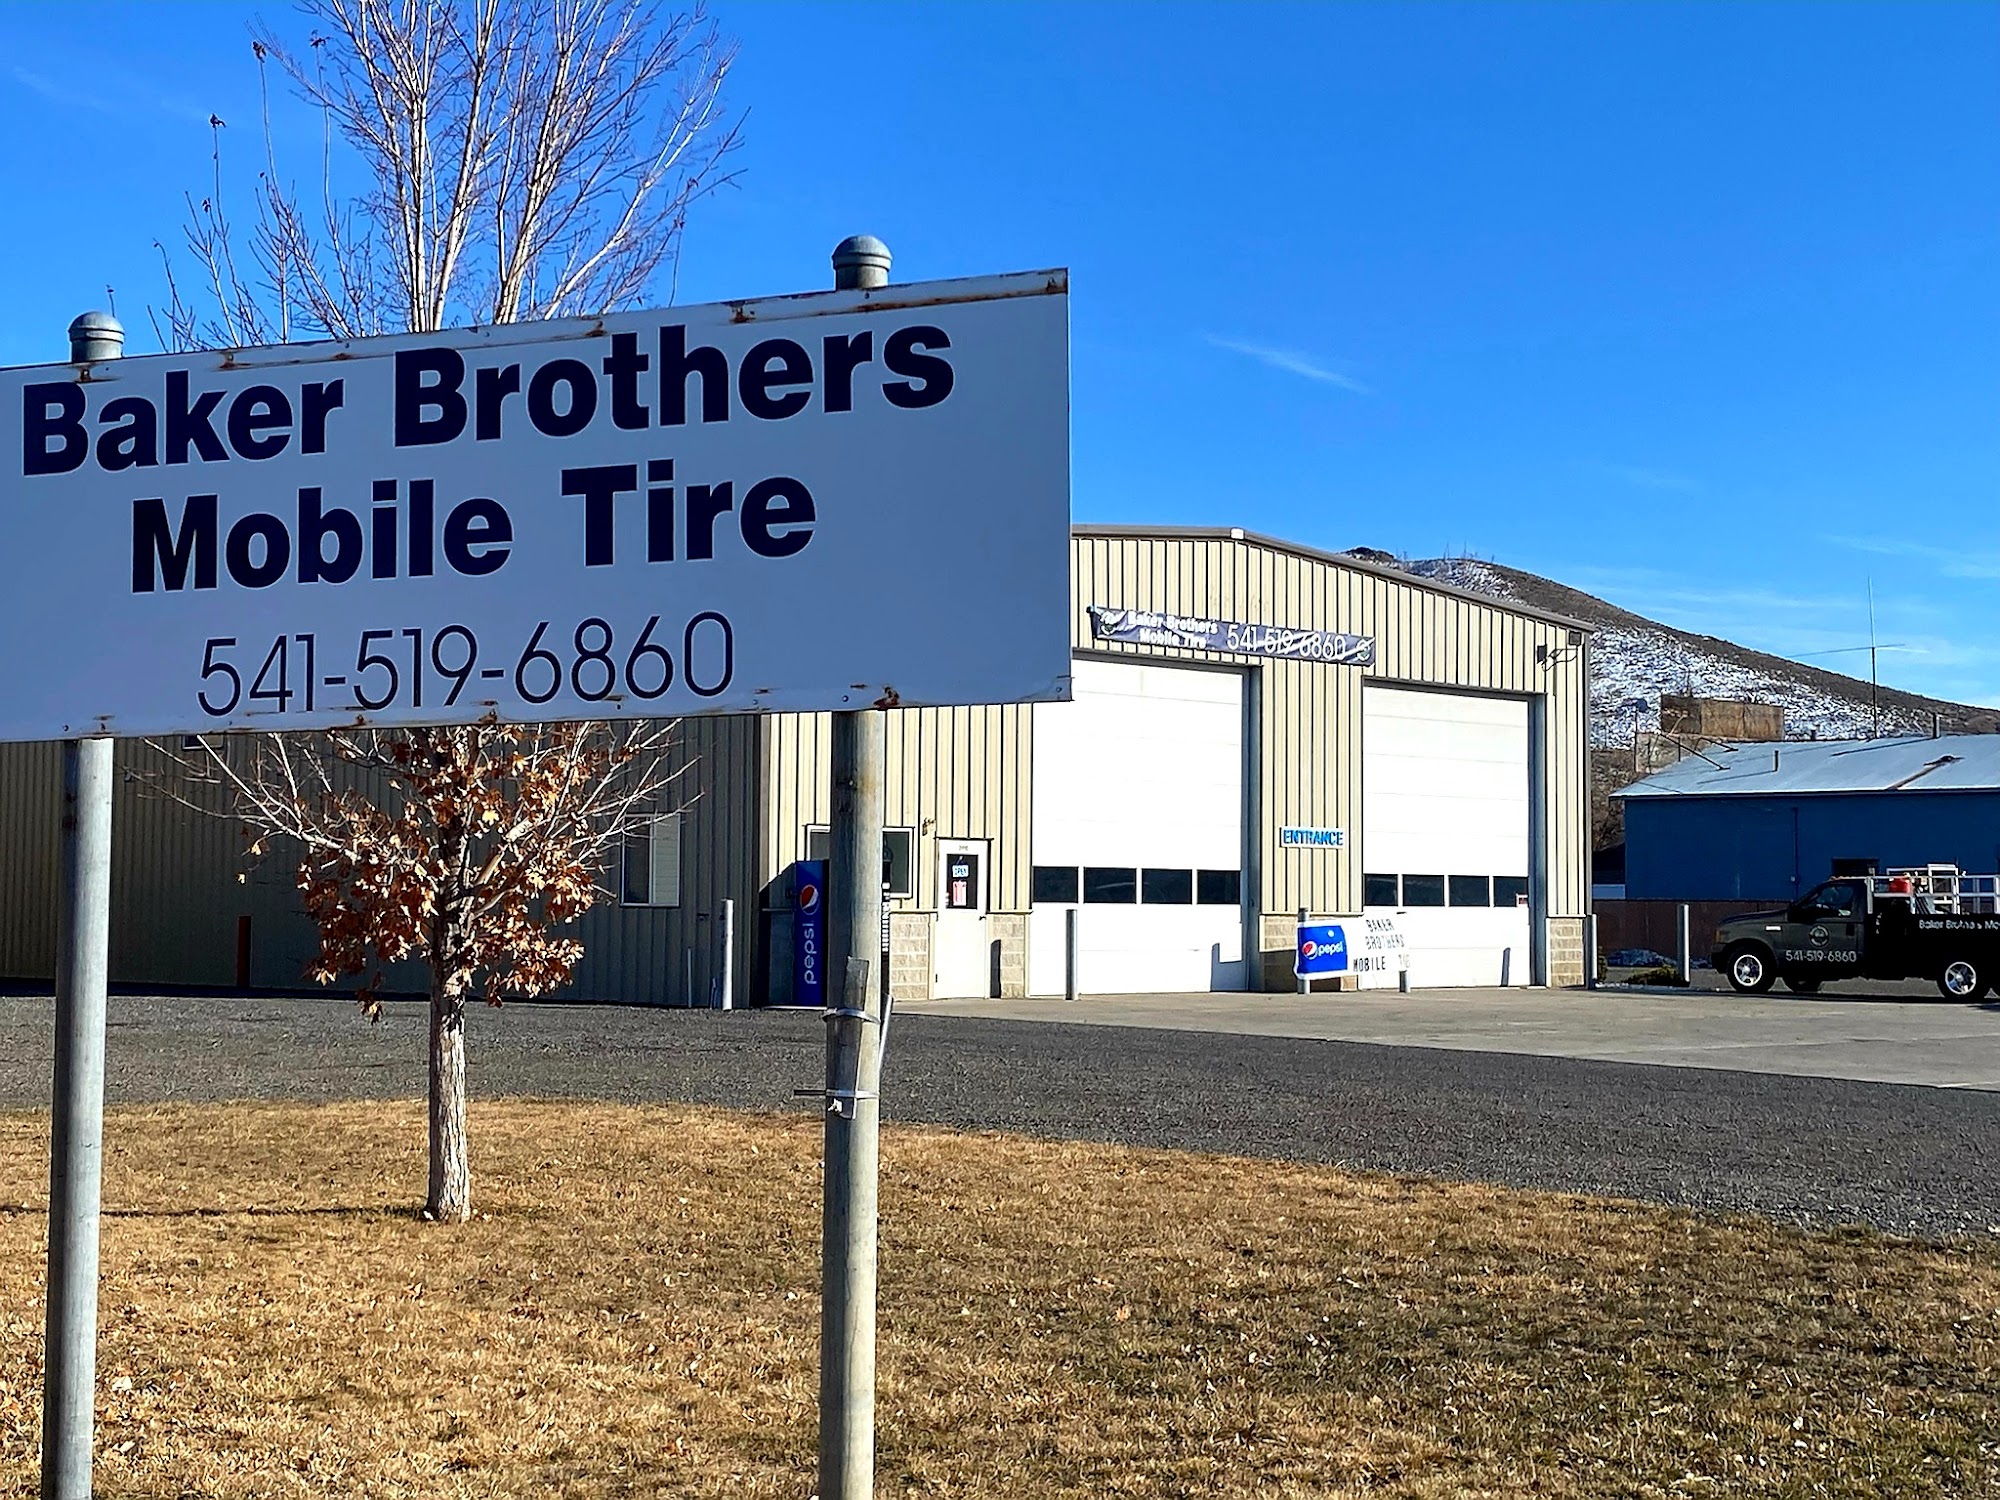 Baker Brothers Mobile Tire